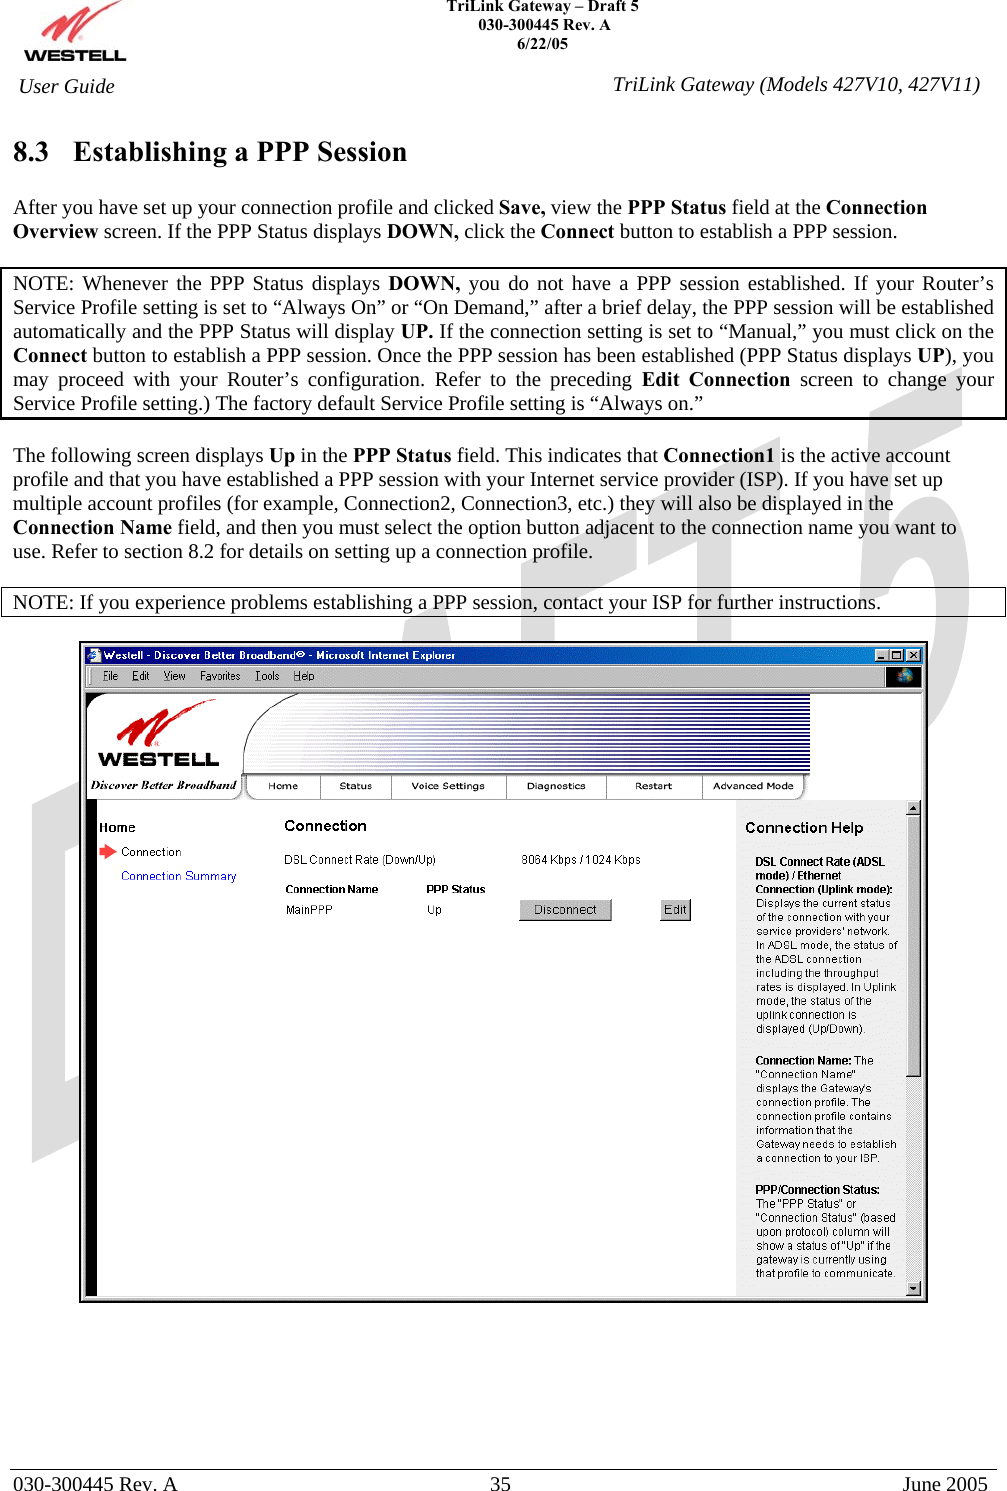    TriLink Gateway – Draft 5   030-300445 Rev. A 6/22/05   030-300445 Rev. A  35  June 2005  User Guide  TriLink Gateway (Models 427V10, 427V11)8.3  Establishing a PPP Session  After you have set up your connection profile and clicked Save, view the PPP Status field at the Connection Overview screen. If the PPP Status displays DOWN, click the Connect button to establish a PPP session.  NOTE: Whenever the PPP Status displays DOWN, you do not have a PPP session established. If your Router’s Service Profile setting is set to “Always On” or “On Demand,” after a brief delay, the PPP session will be established automatically and the PPP Status will display UP. If the connection setting is set to “Manual,” you must click on the Connect button to establish a PPP session. Once the PPP session has been established (PPP Status displays UP), you may proceed with your Router’s configuration. Refer to the preceding Edit Connection screen to change your Service Profile setting.) The factory default Service Profile setting is “Always on.”  The following screen displays Up in the PPP Status field. This indicates that Connection1 is the active account profile and that you have established a PPP session with your Internet service provider (ISP). If you have set up multiple account profiles (for example, Connection2, Connection3, etc.) they will also be displayed in the Connection Name field, and then you must select the option button adjacent to the connection name you want to use. Refer to section 8.2 for details on setting up a connection profile.  NOTE: If you experience problems establishing a PPP session, contact your ISP for further instructions.         